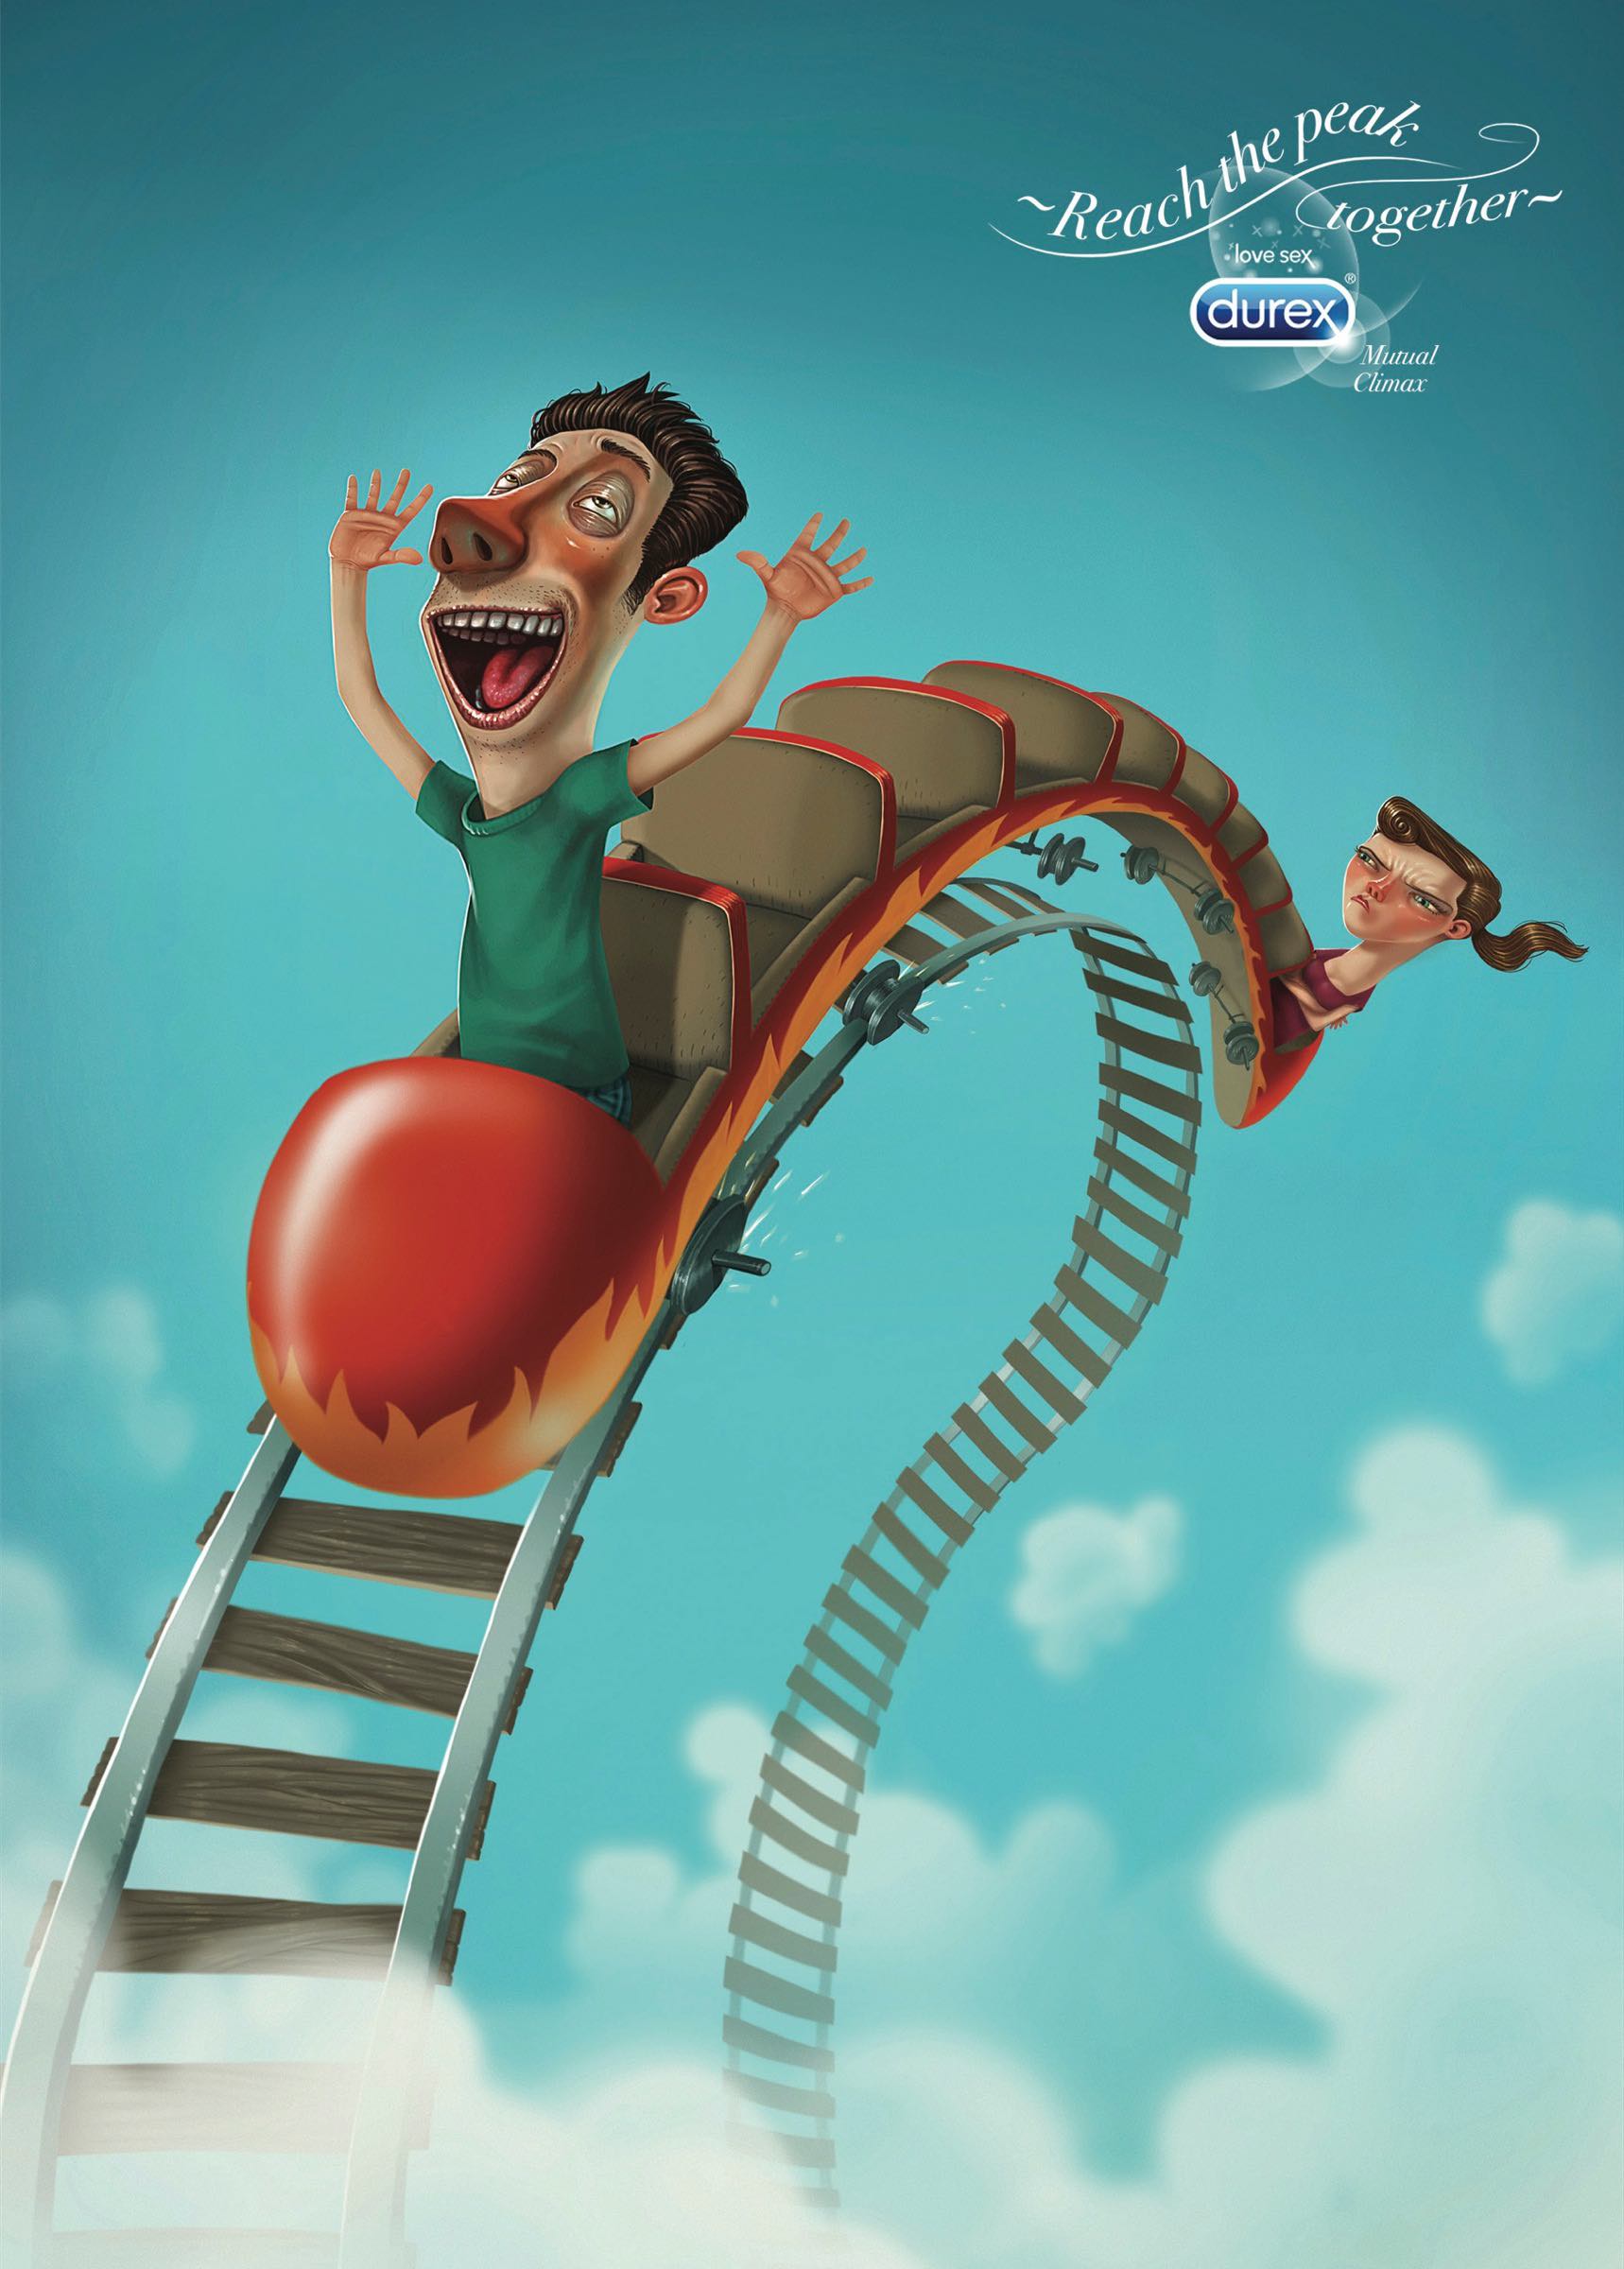 Durex: Rollercoaster, Reach the peak together Campaigns of the World®